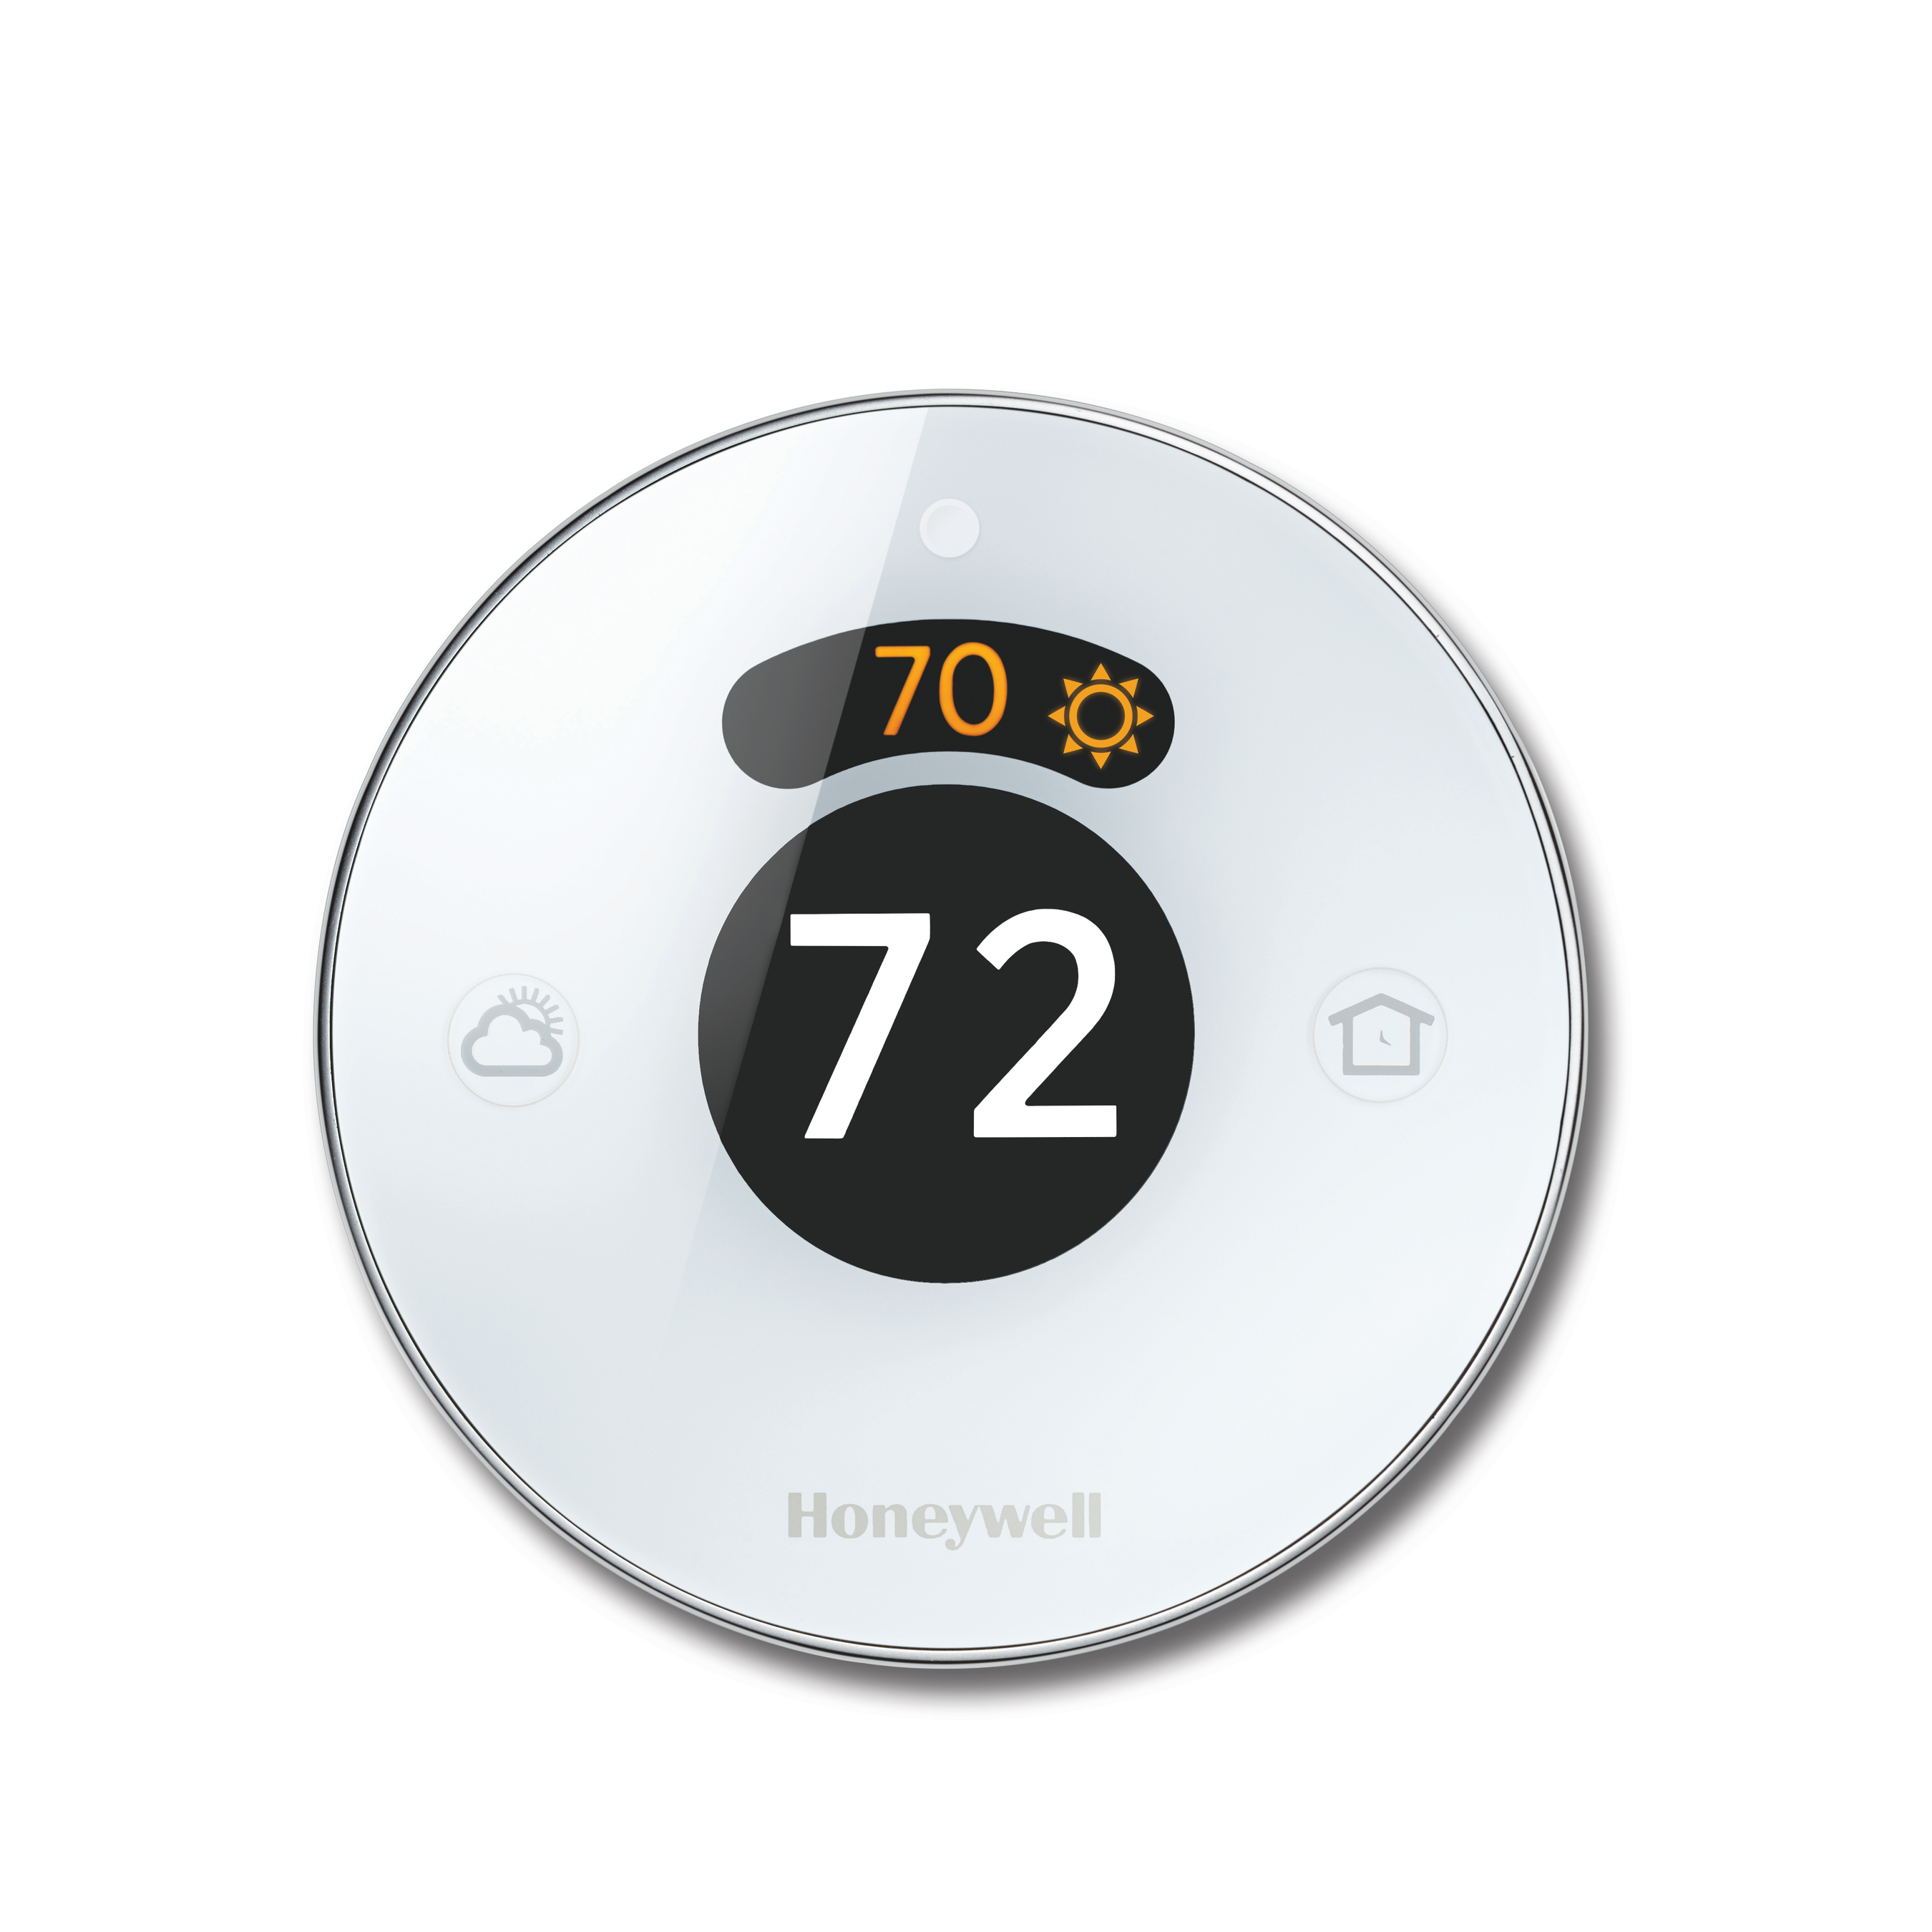 Honeywell's Lyric Round thermostat, as well as Total Connect Comfort thermostats (Wi-Fi and RedLink), can now be controlled simply with the power of voice using Amazon Alexa-enabled devices like Echo thanks to a new Alexa Skill!